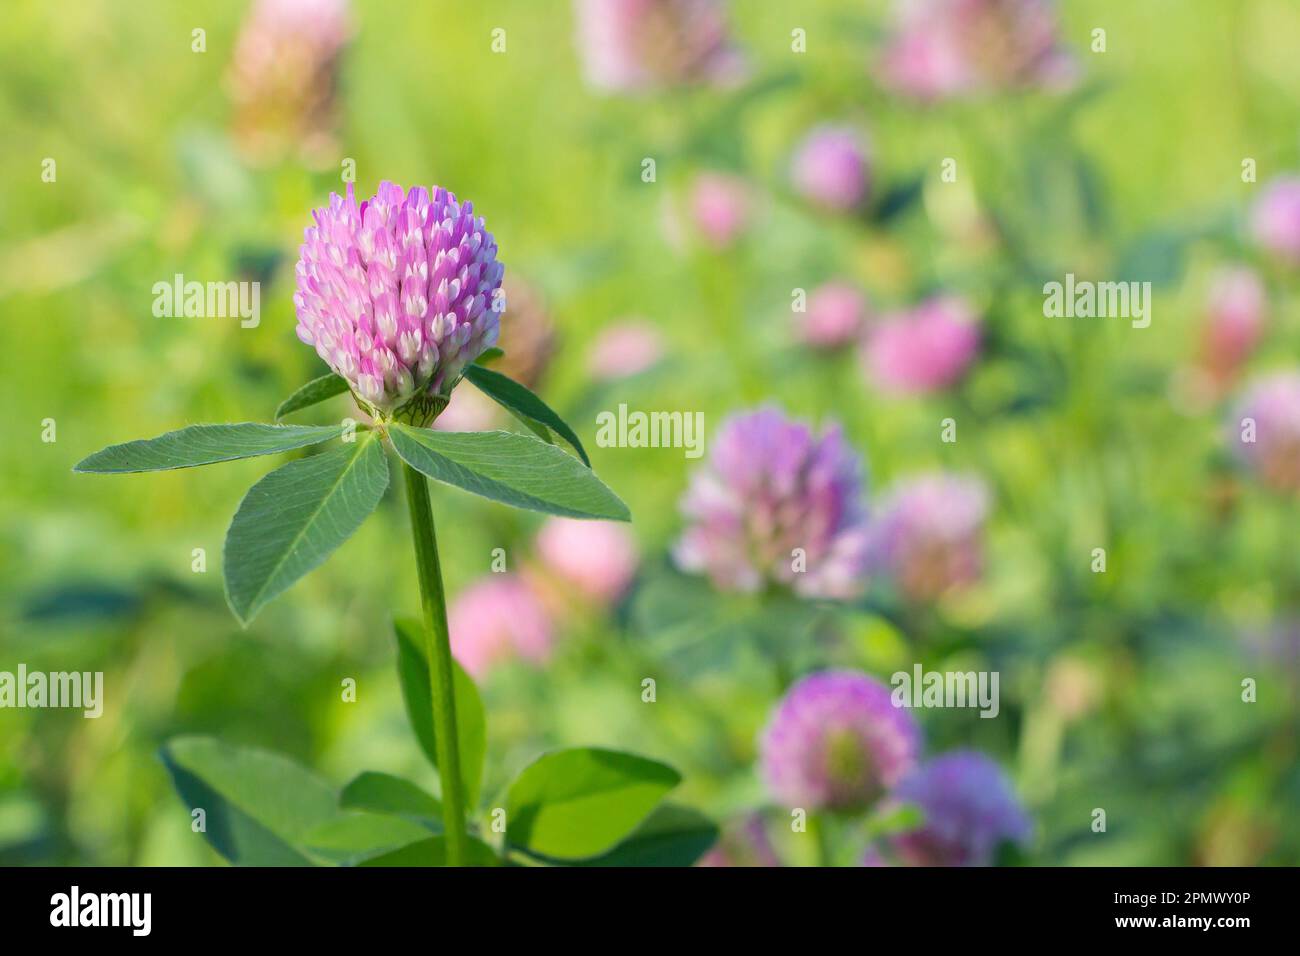 Lilac clover flower close-up in the field outdoor Stock Photo